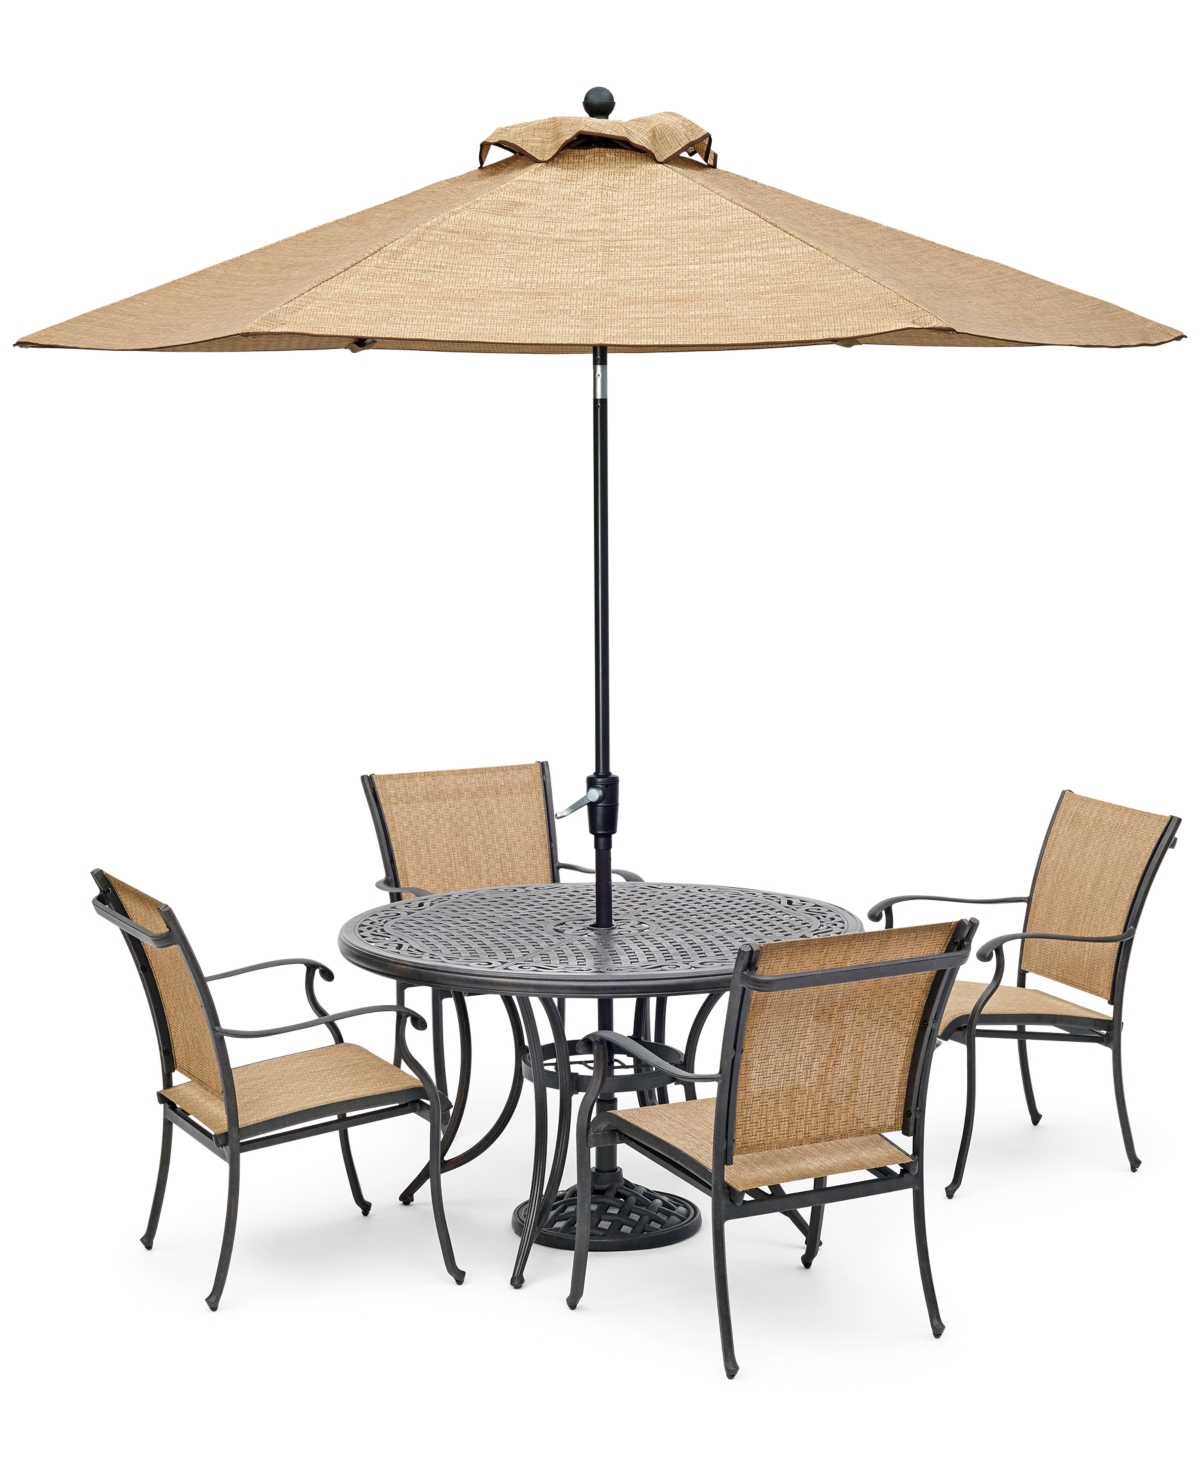 Beachmont Ii Outdoor 5-Pc. Dining Set (48 Round Table and 4 Dining Chairs), Created for Macys